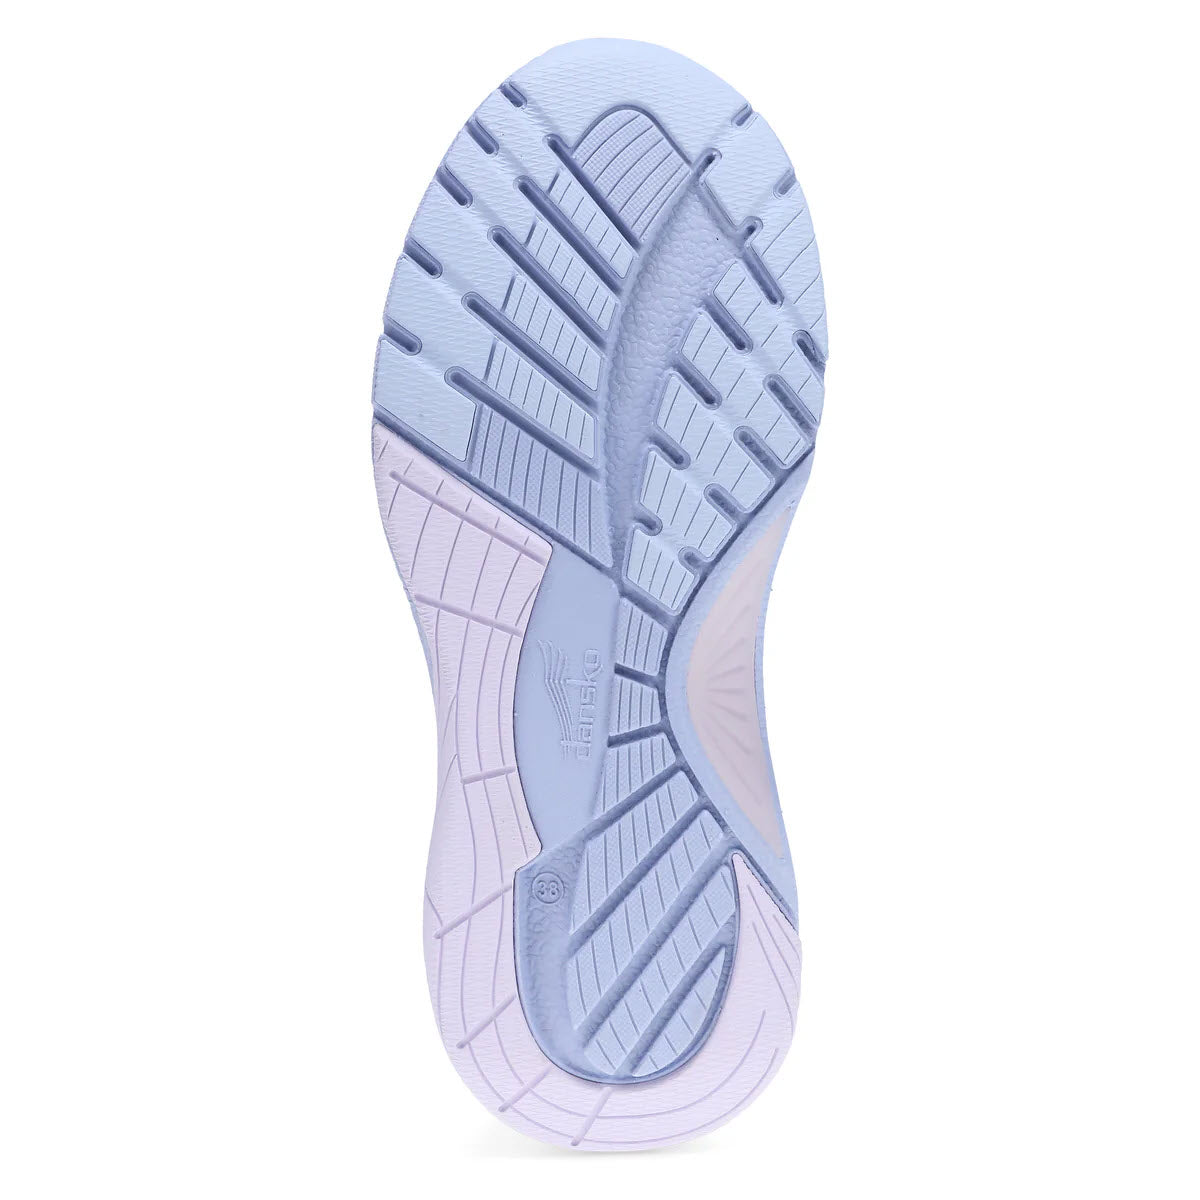 Sole of a DANSKO PEONY LILAC - WOMENS walking sneaker with detailed tread pattern and embossed Dansko Natural Arch Plus logo.